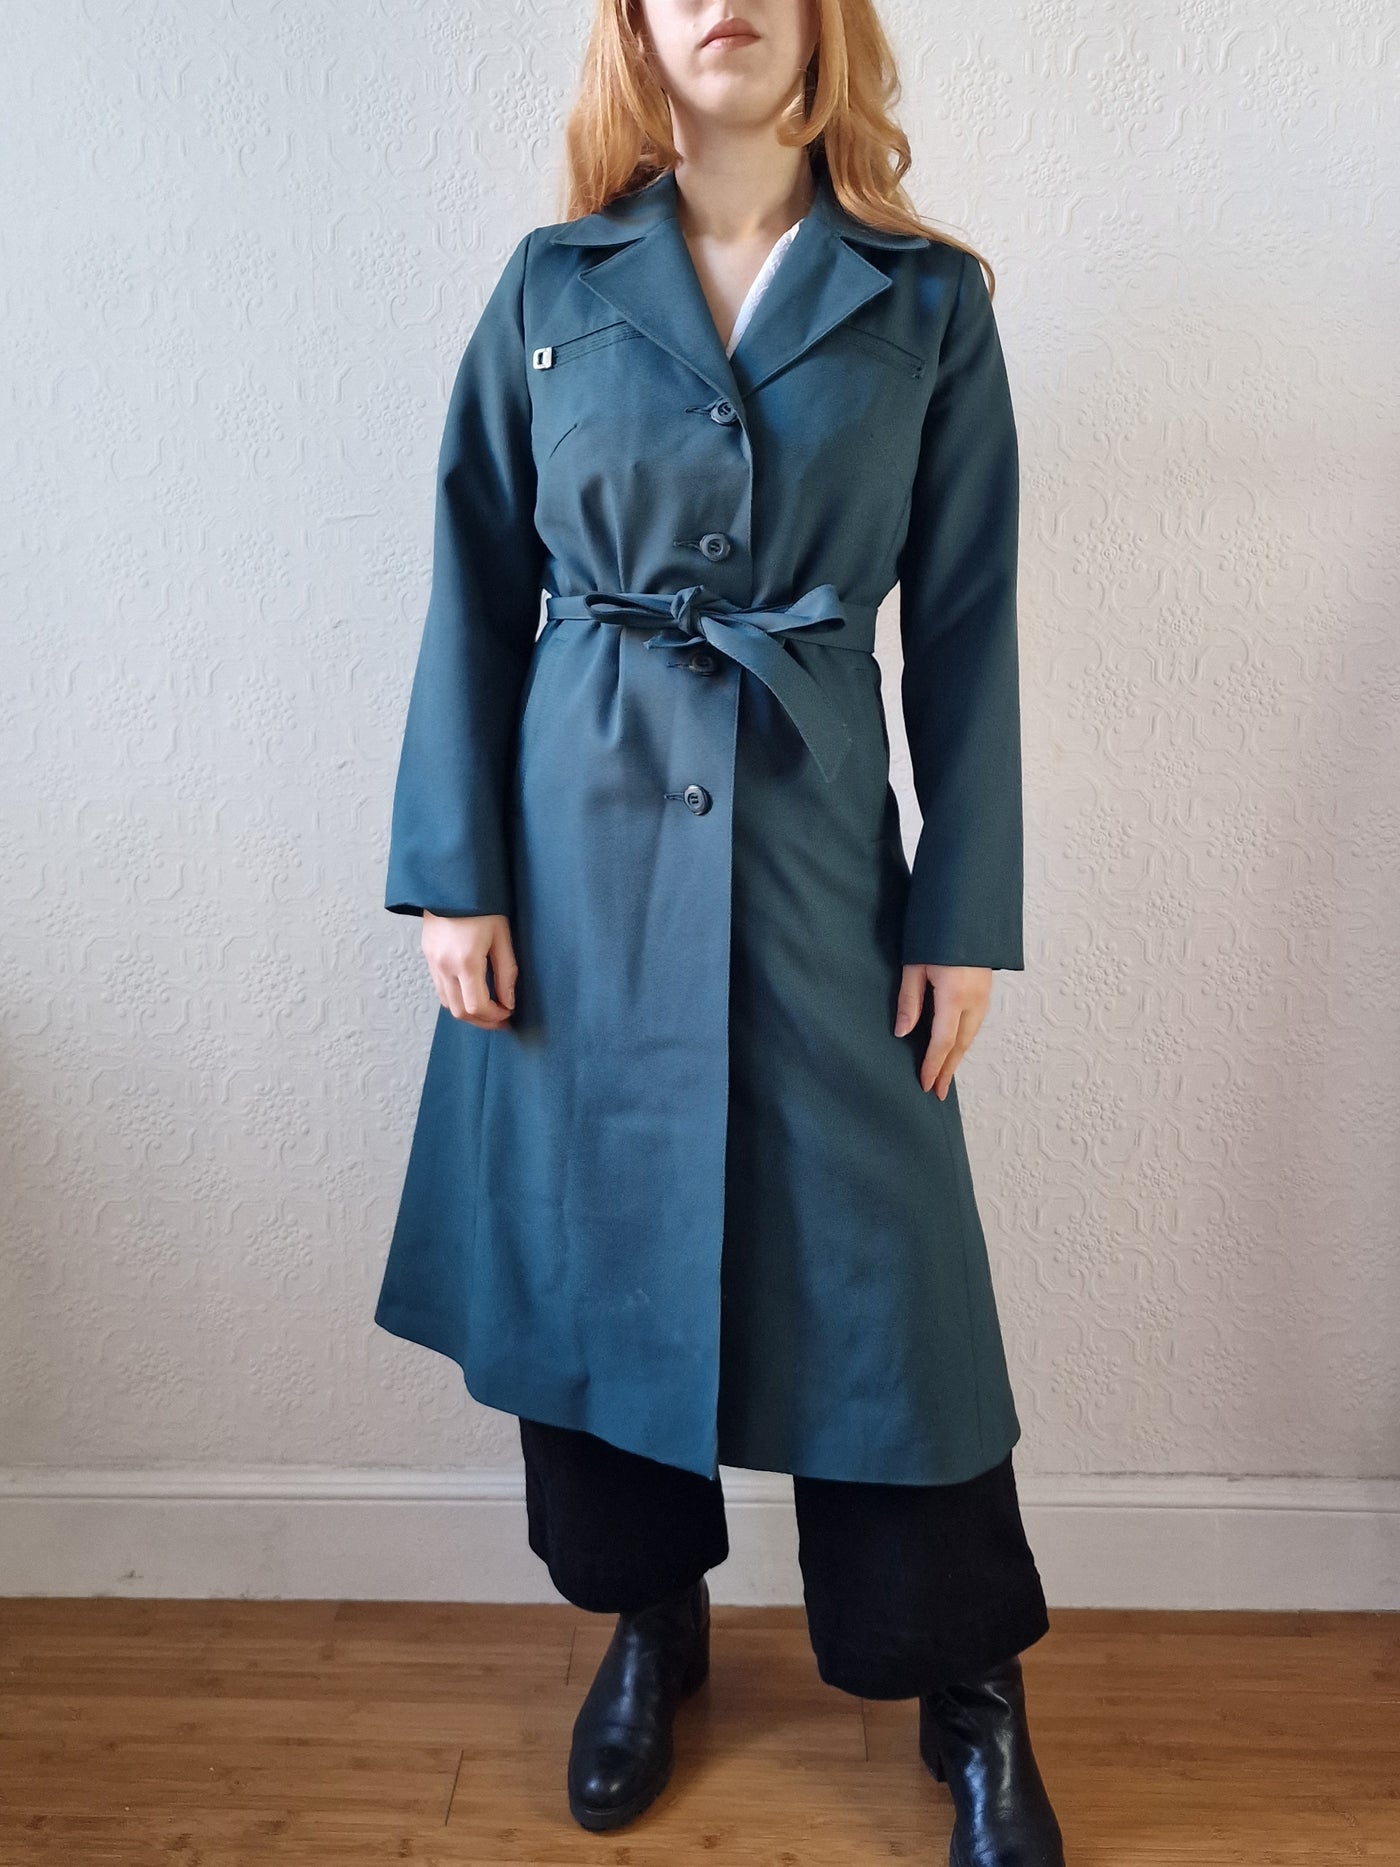 Vintage Dark Teal Green Single Breasted Trench Coat with Belt - S